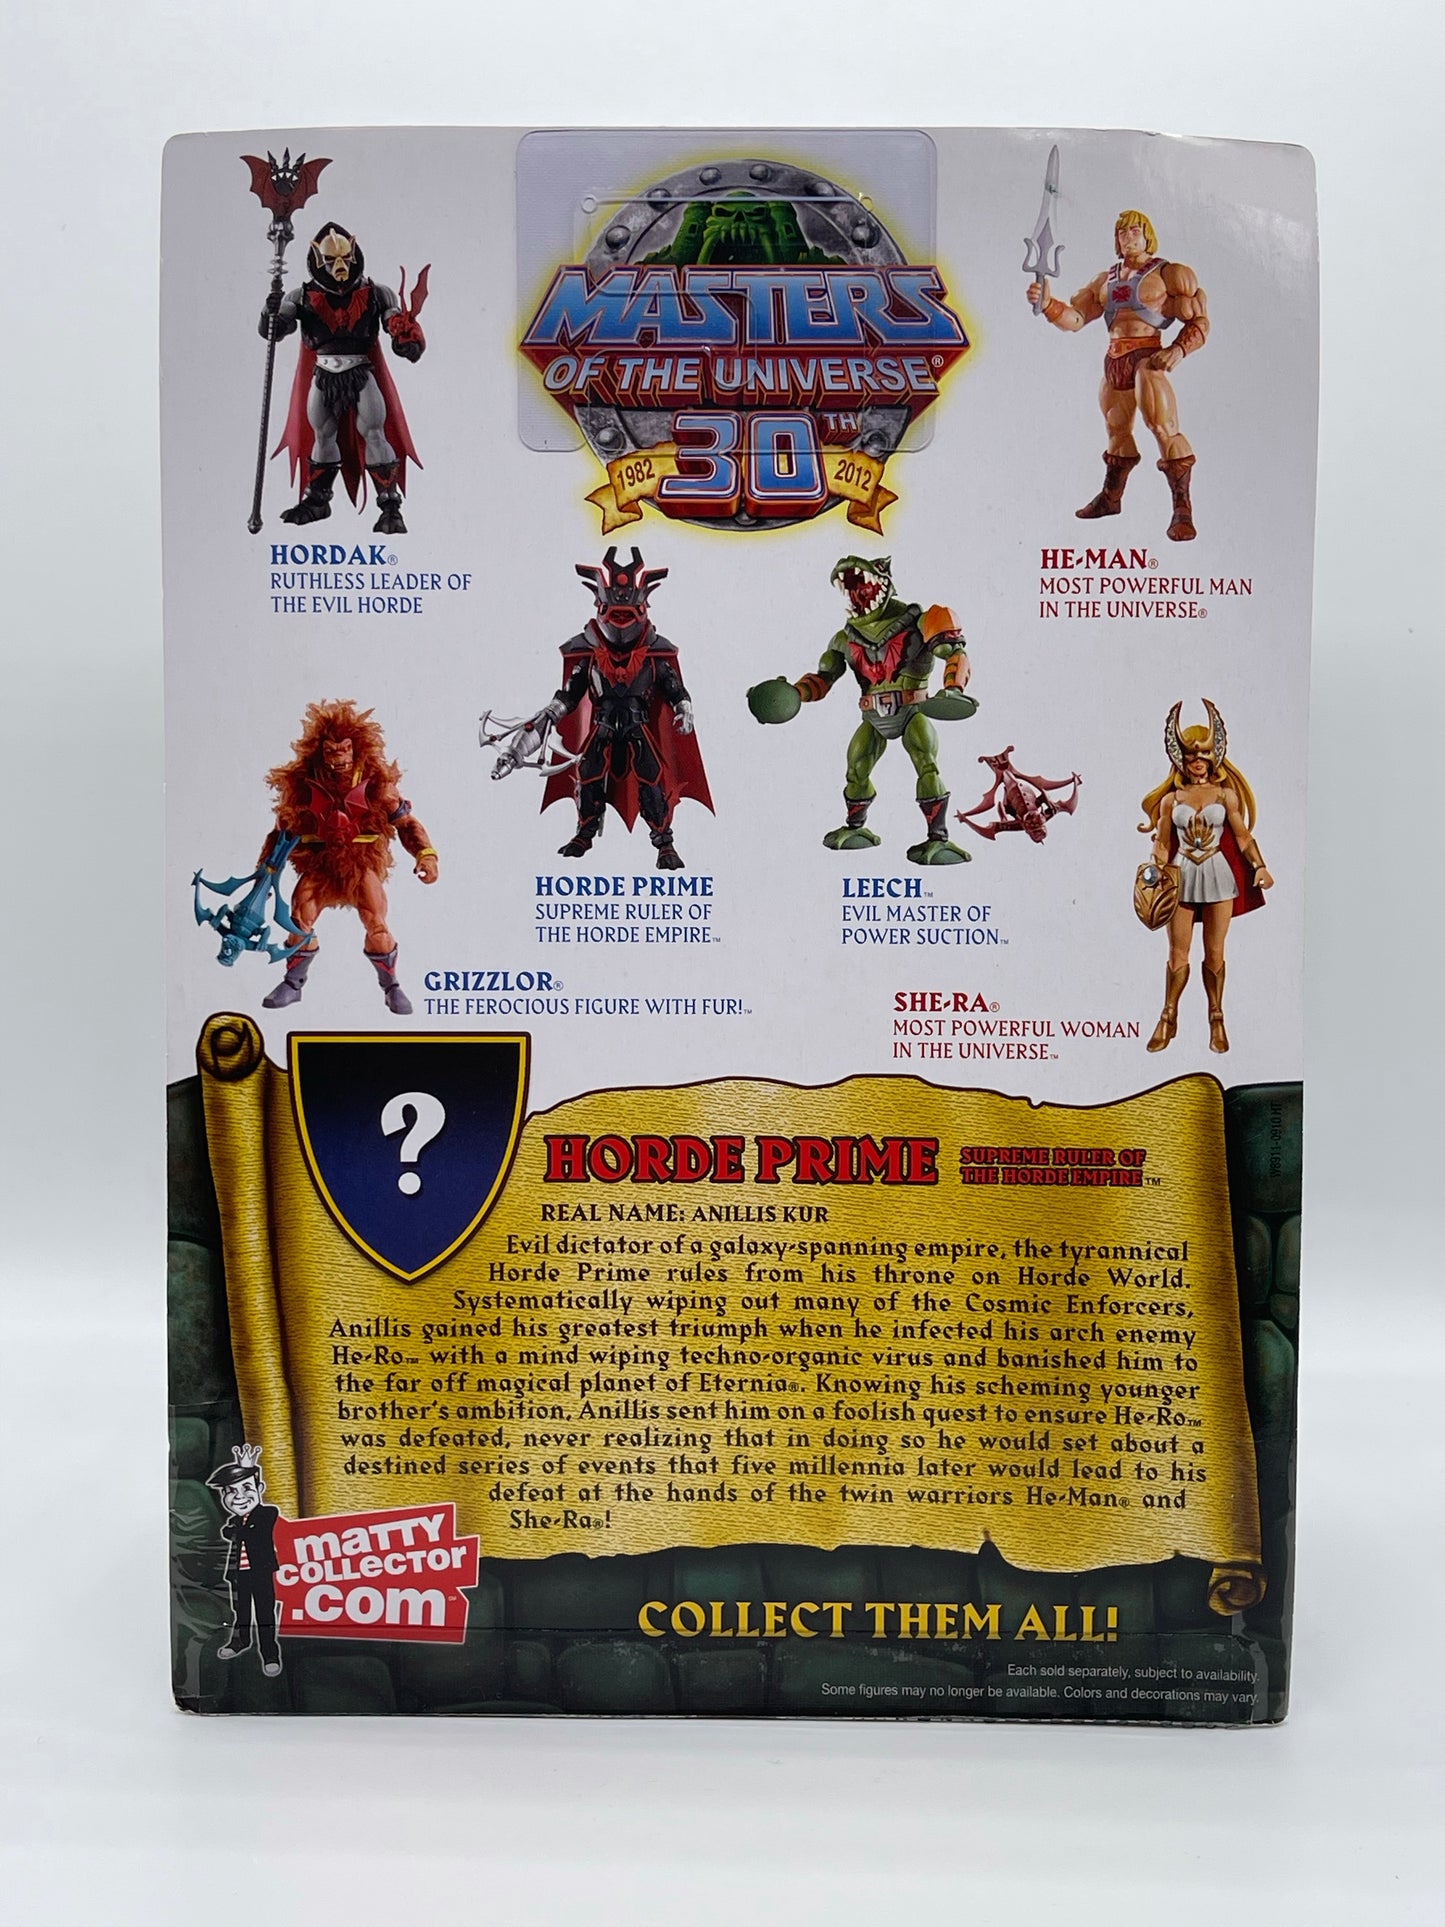 Masters of the Universe Classics Horde Prime